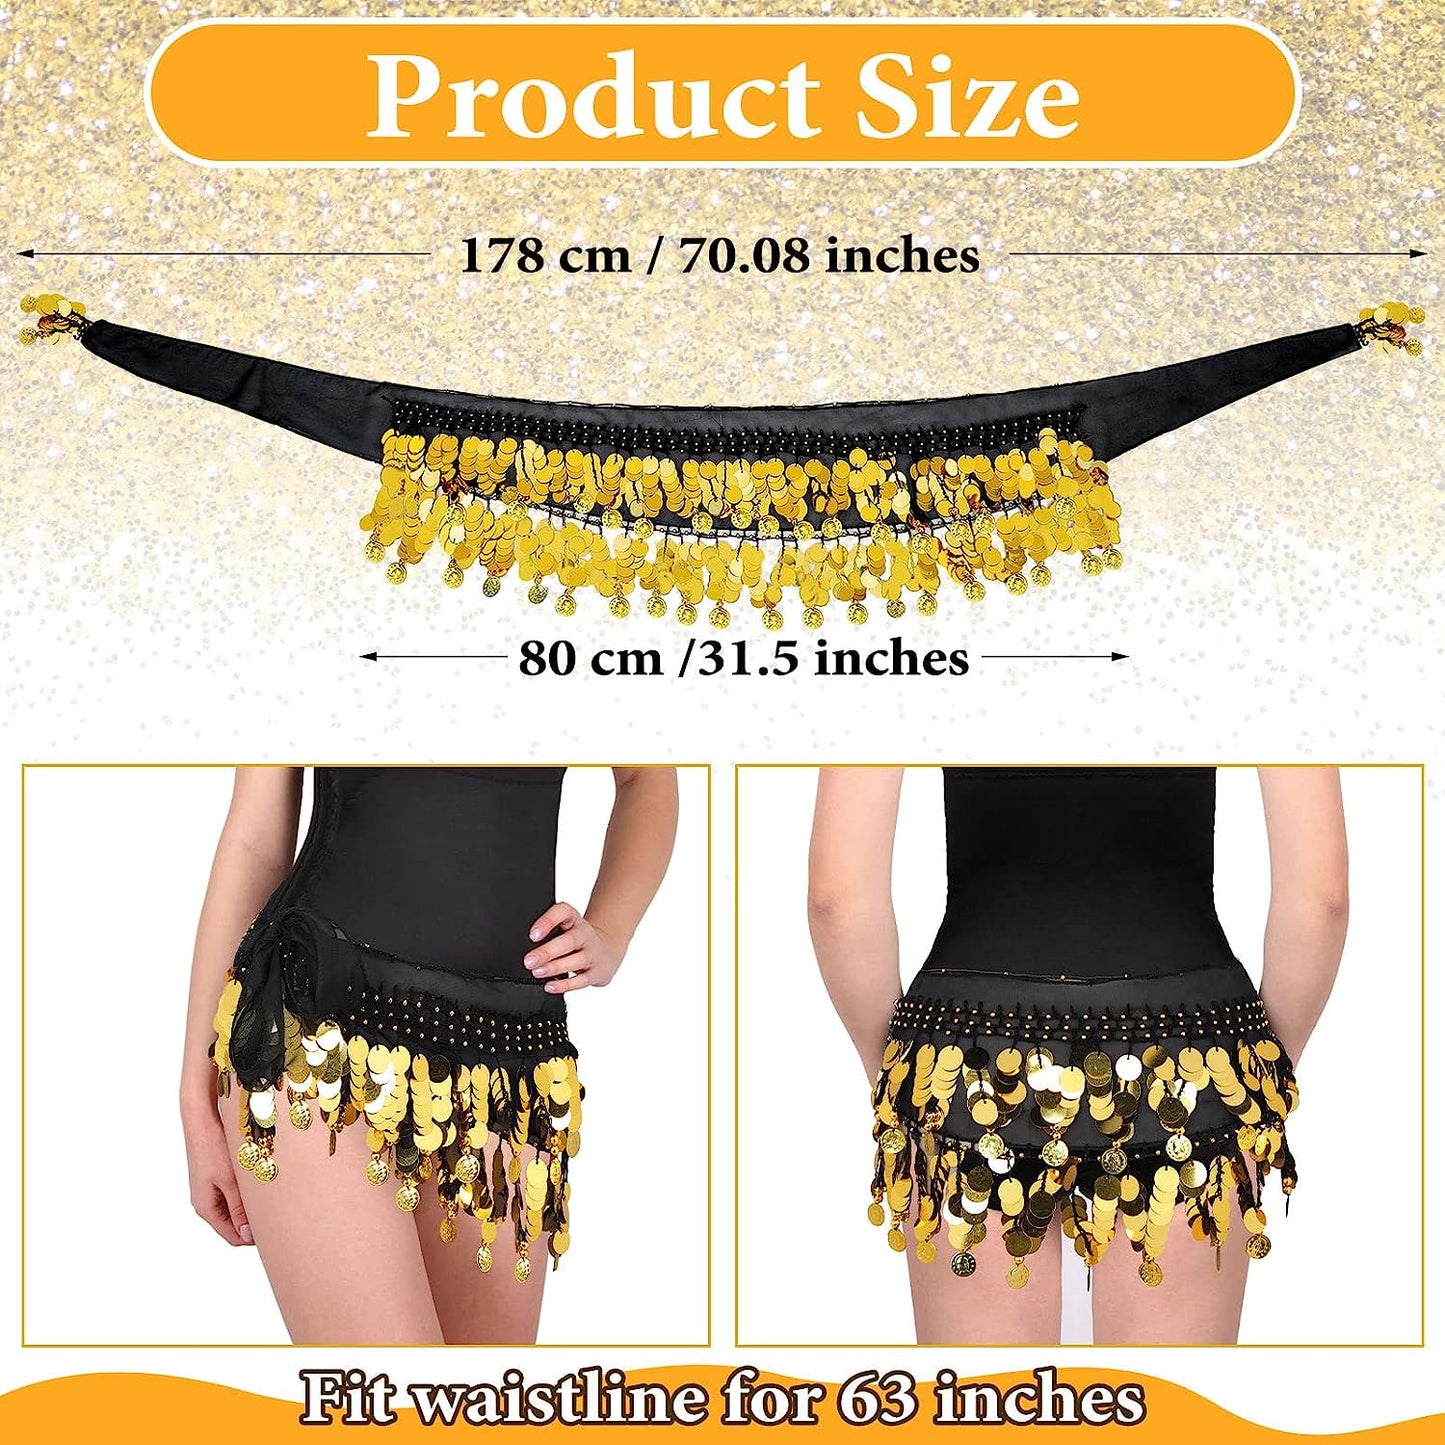 12 Pieces Belly Dance Skirt Hip Scarf with Gold Coins Belly Dancing Wrap Skirt Belt Coin Sash Dance Performance Costume for Women Girls Music Festival Halloween Party Bellydance Yoga Class